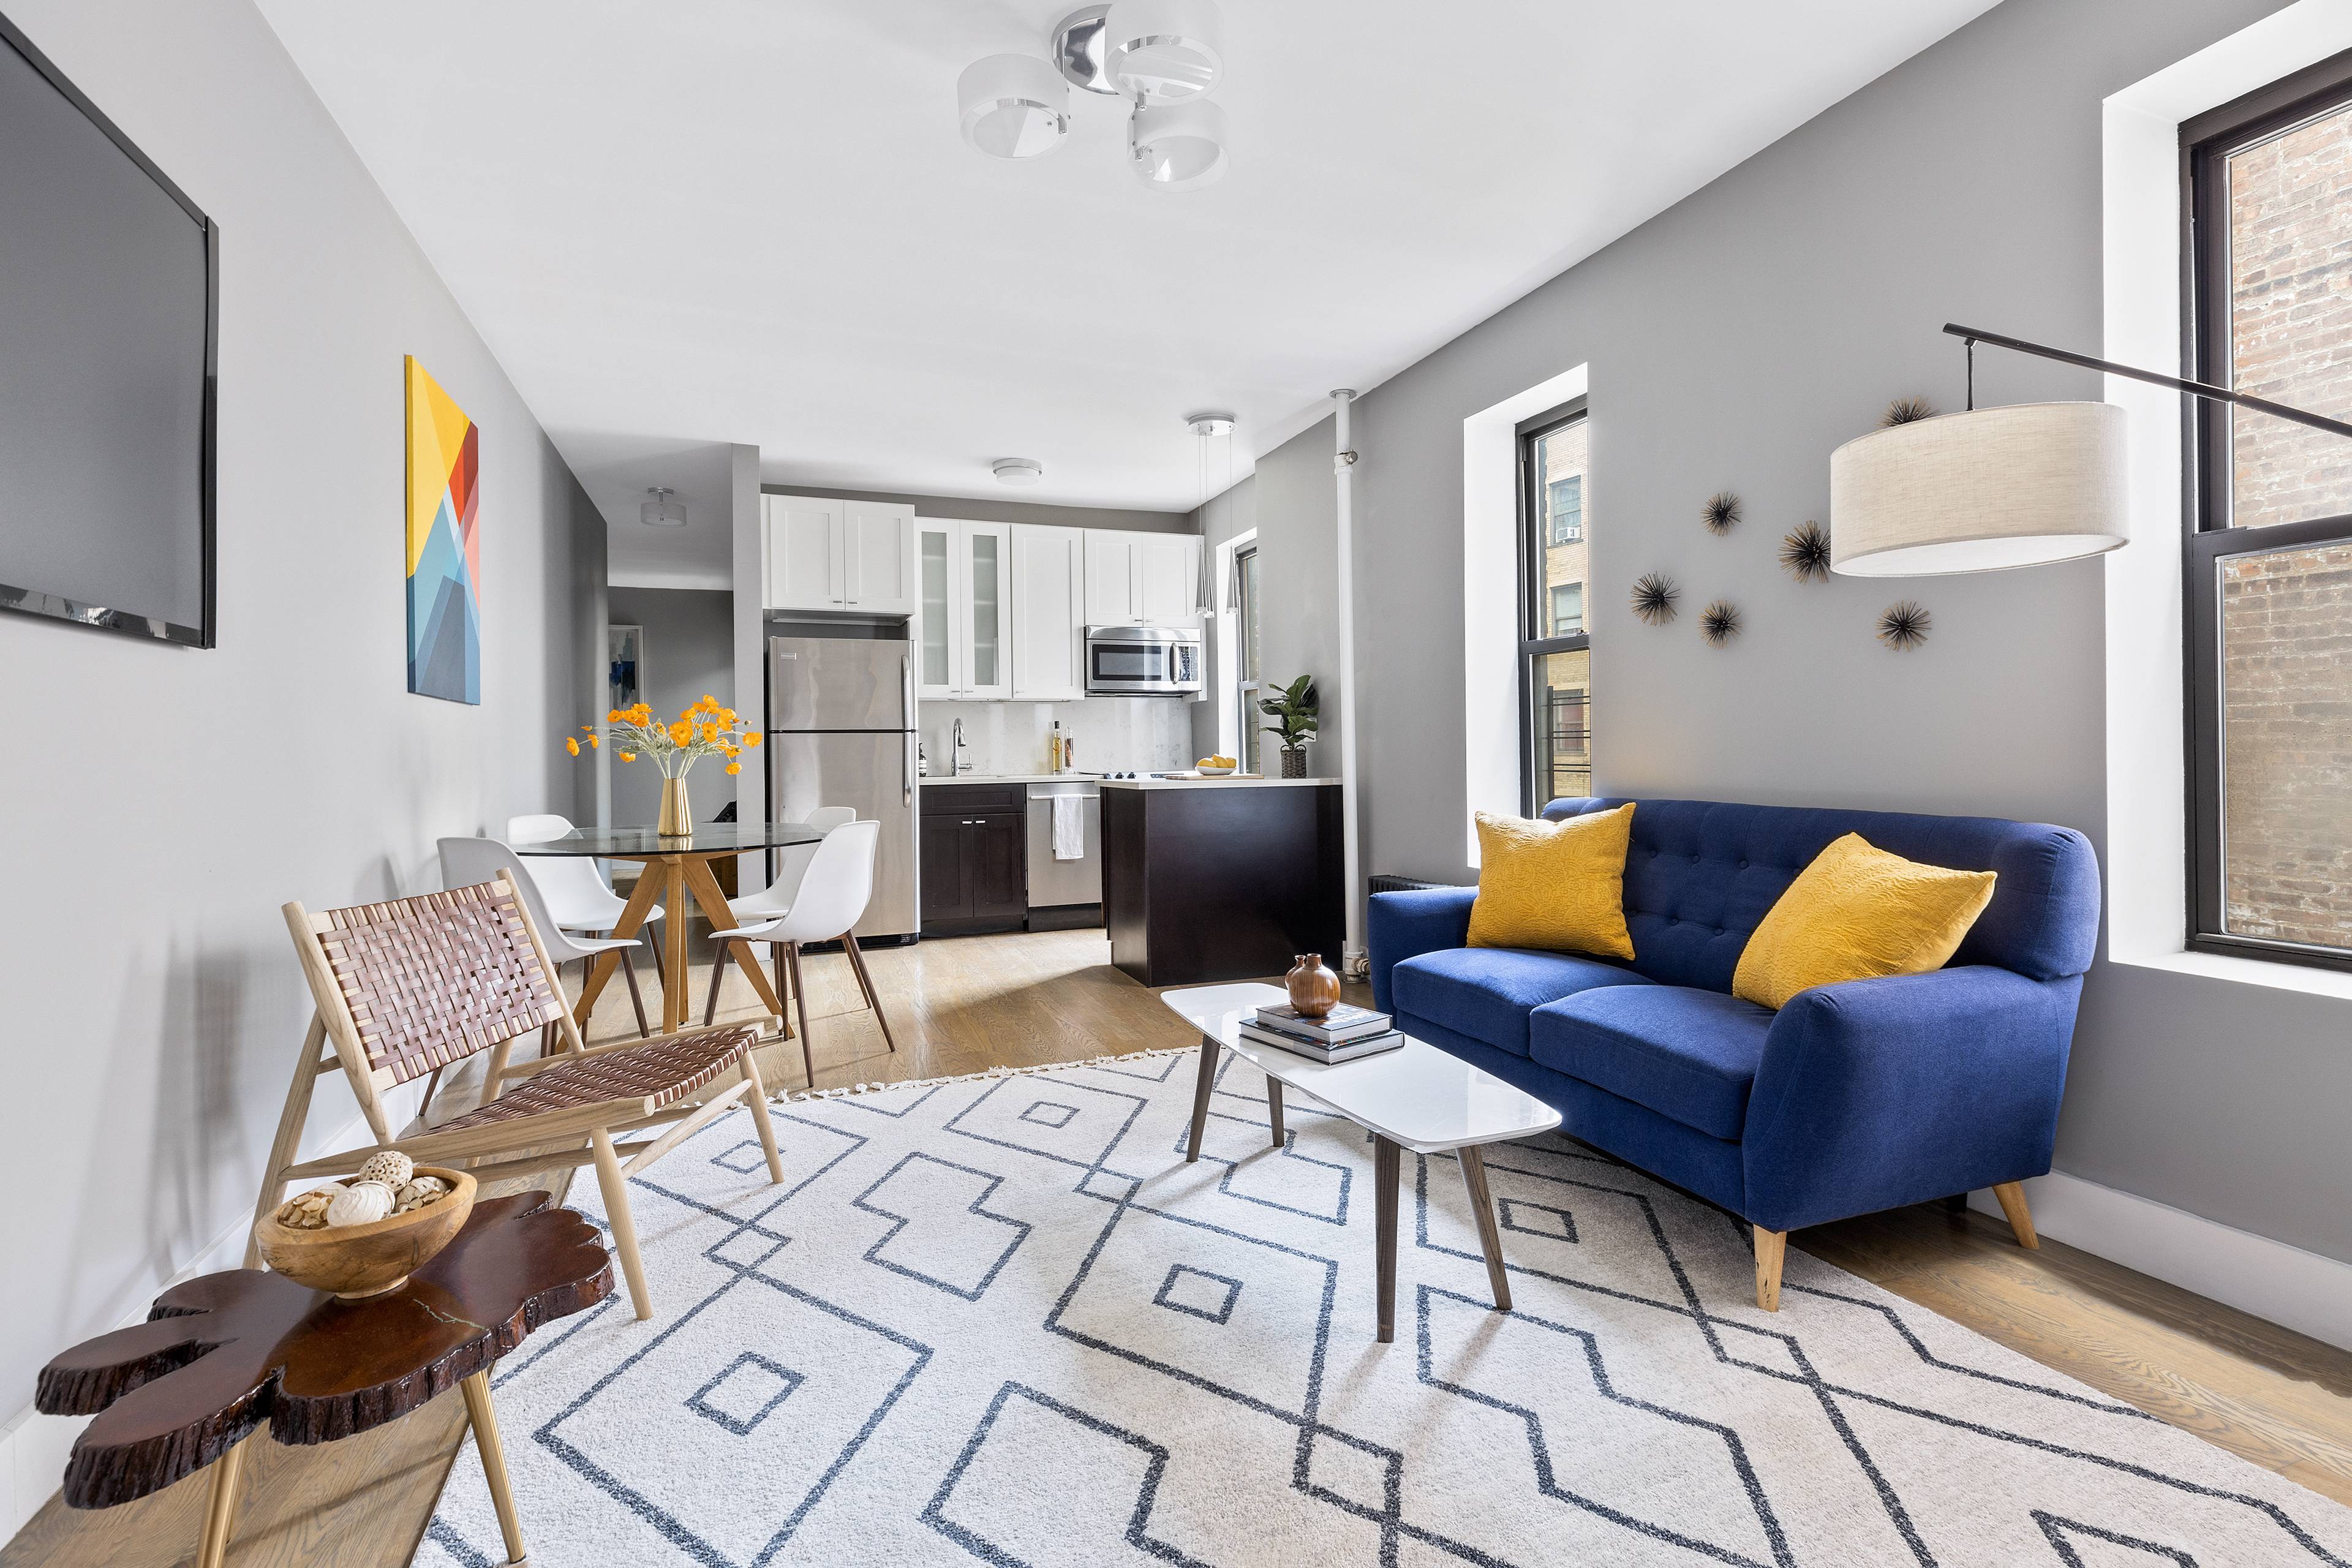 Welcome home to this completely renovated condominium, reimagined and reinvigorated with sleek finishes throughout, mixing sophisticated modern style with beautifully maintained classic pre war charm.